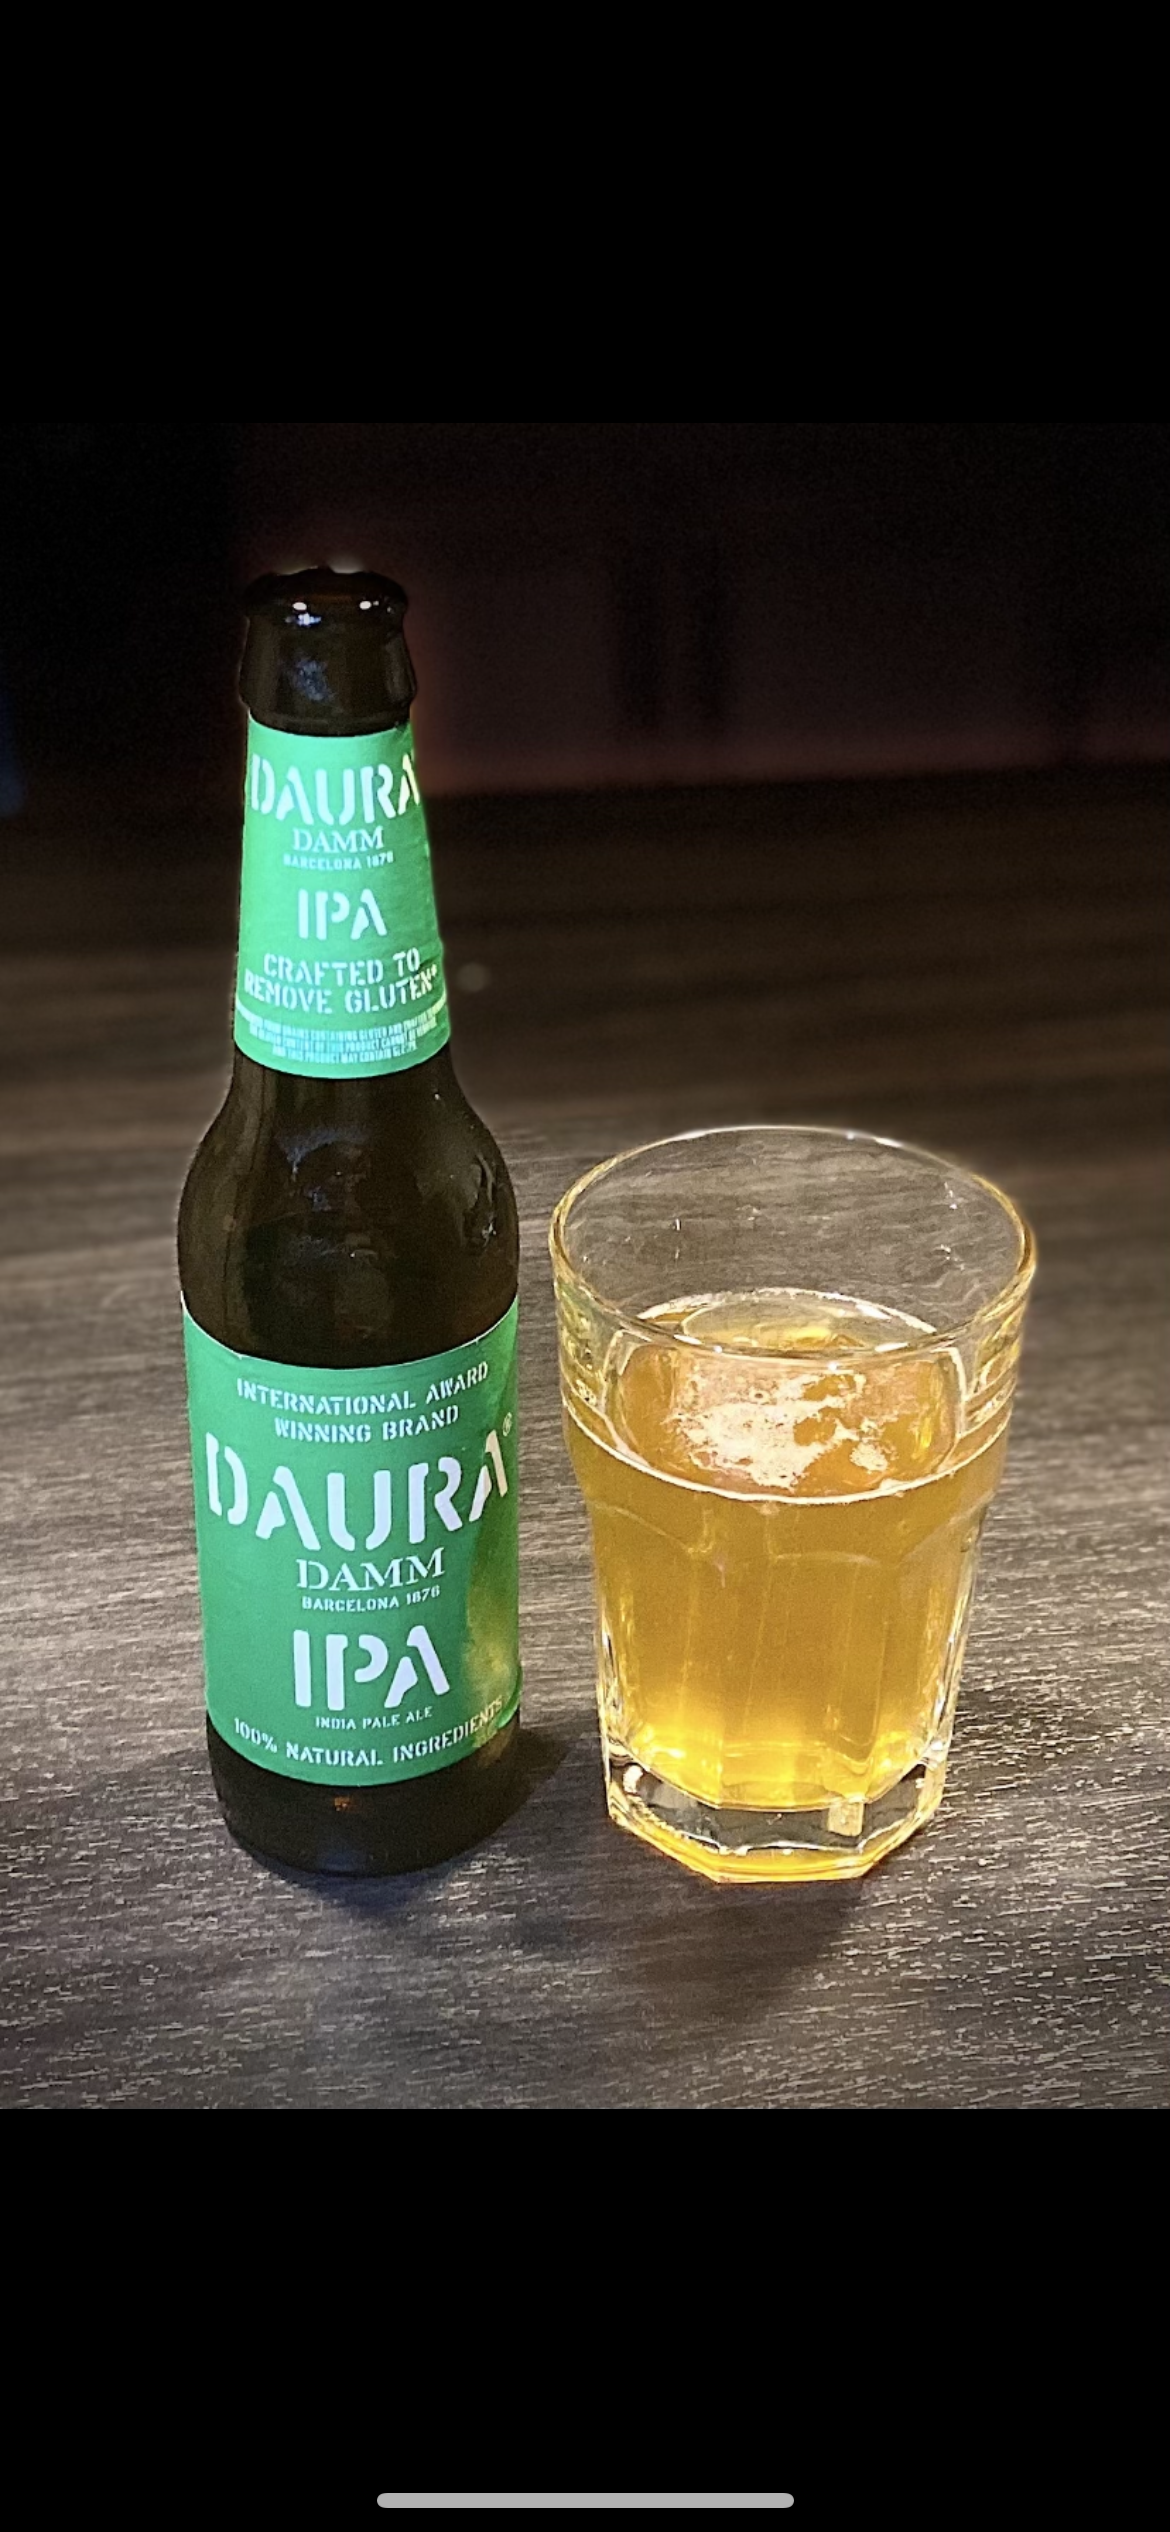 review of this India Pale Ale is hoppy, but not bitter. It has a golden color and a mellow flavor. It is 6.6% alcohol by volume and is sure to satisfy your taste buds.